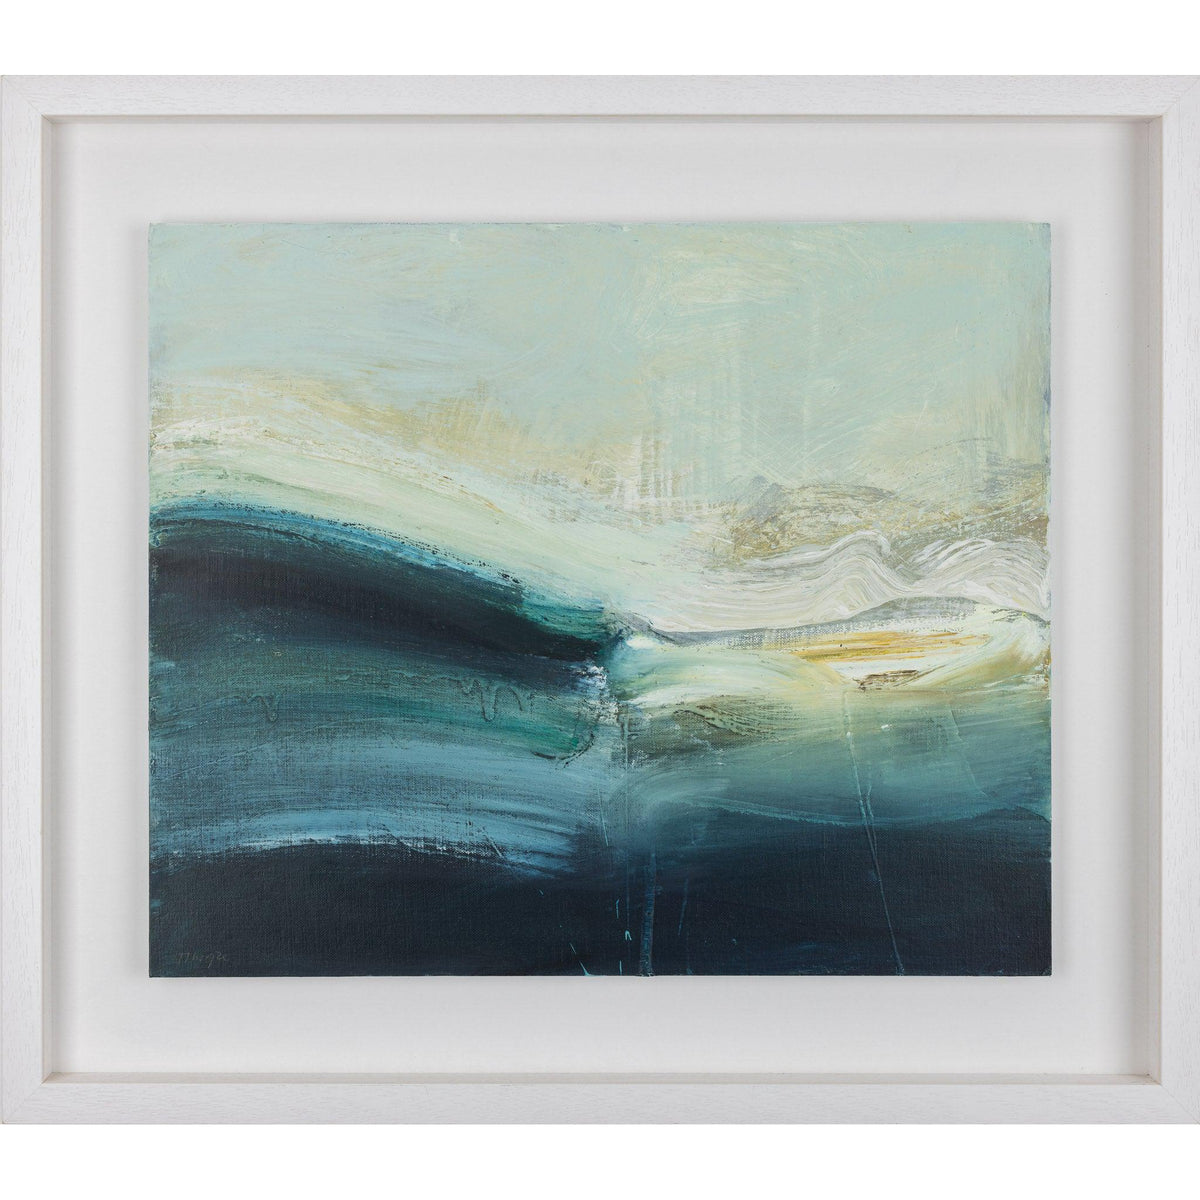 &#39;Silent Coast&#39; oil original by Justine Lois Thorpe, available at Padstow Gallery, Cornwall